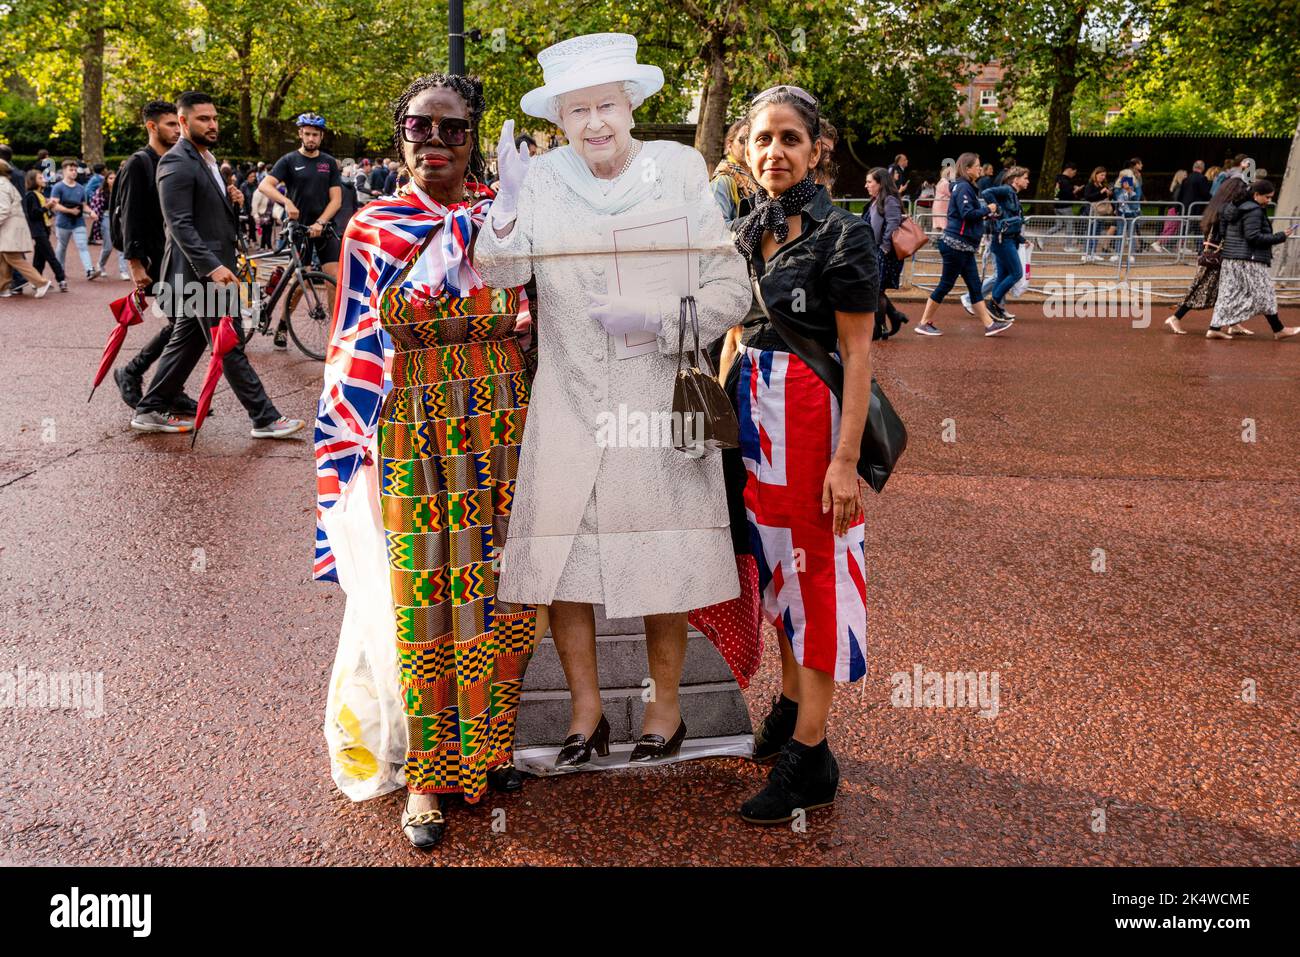 The Day After Queen Elizabeth II Passes Away Two Women Carry A Life Size Cardboard Cut-Out Of The Queen In Tribute, The Mall, London, UK. Stock Photo